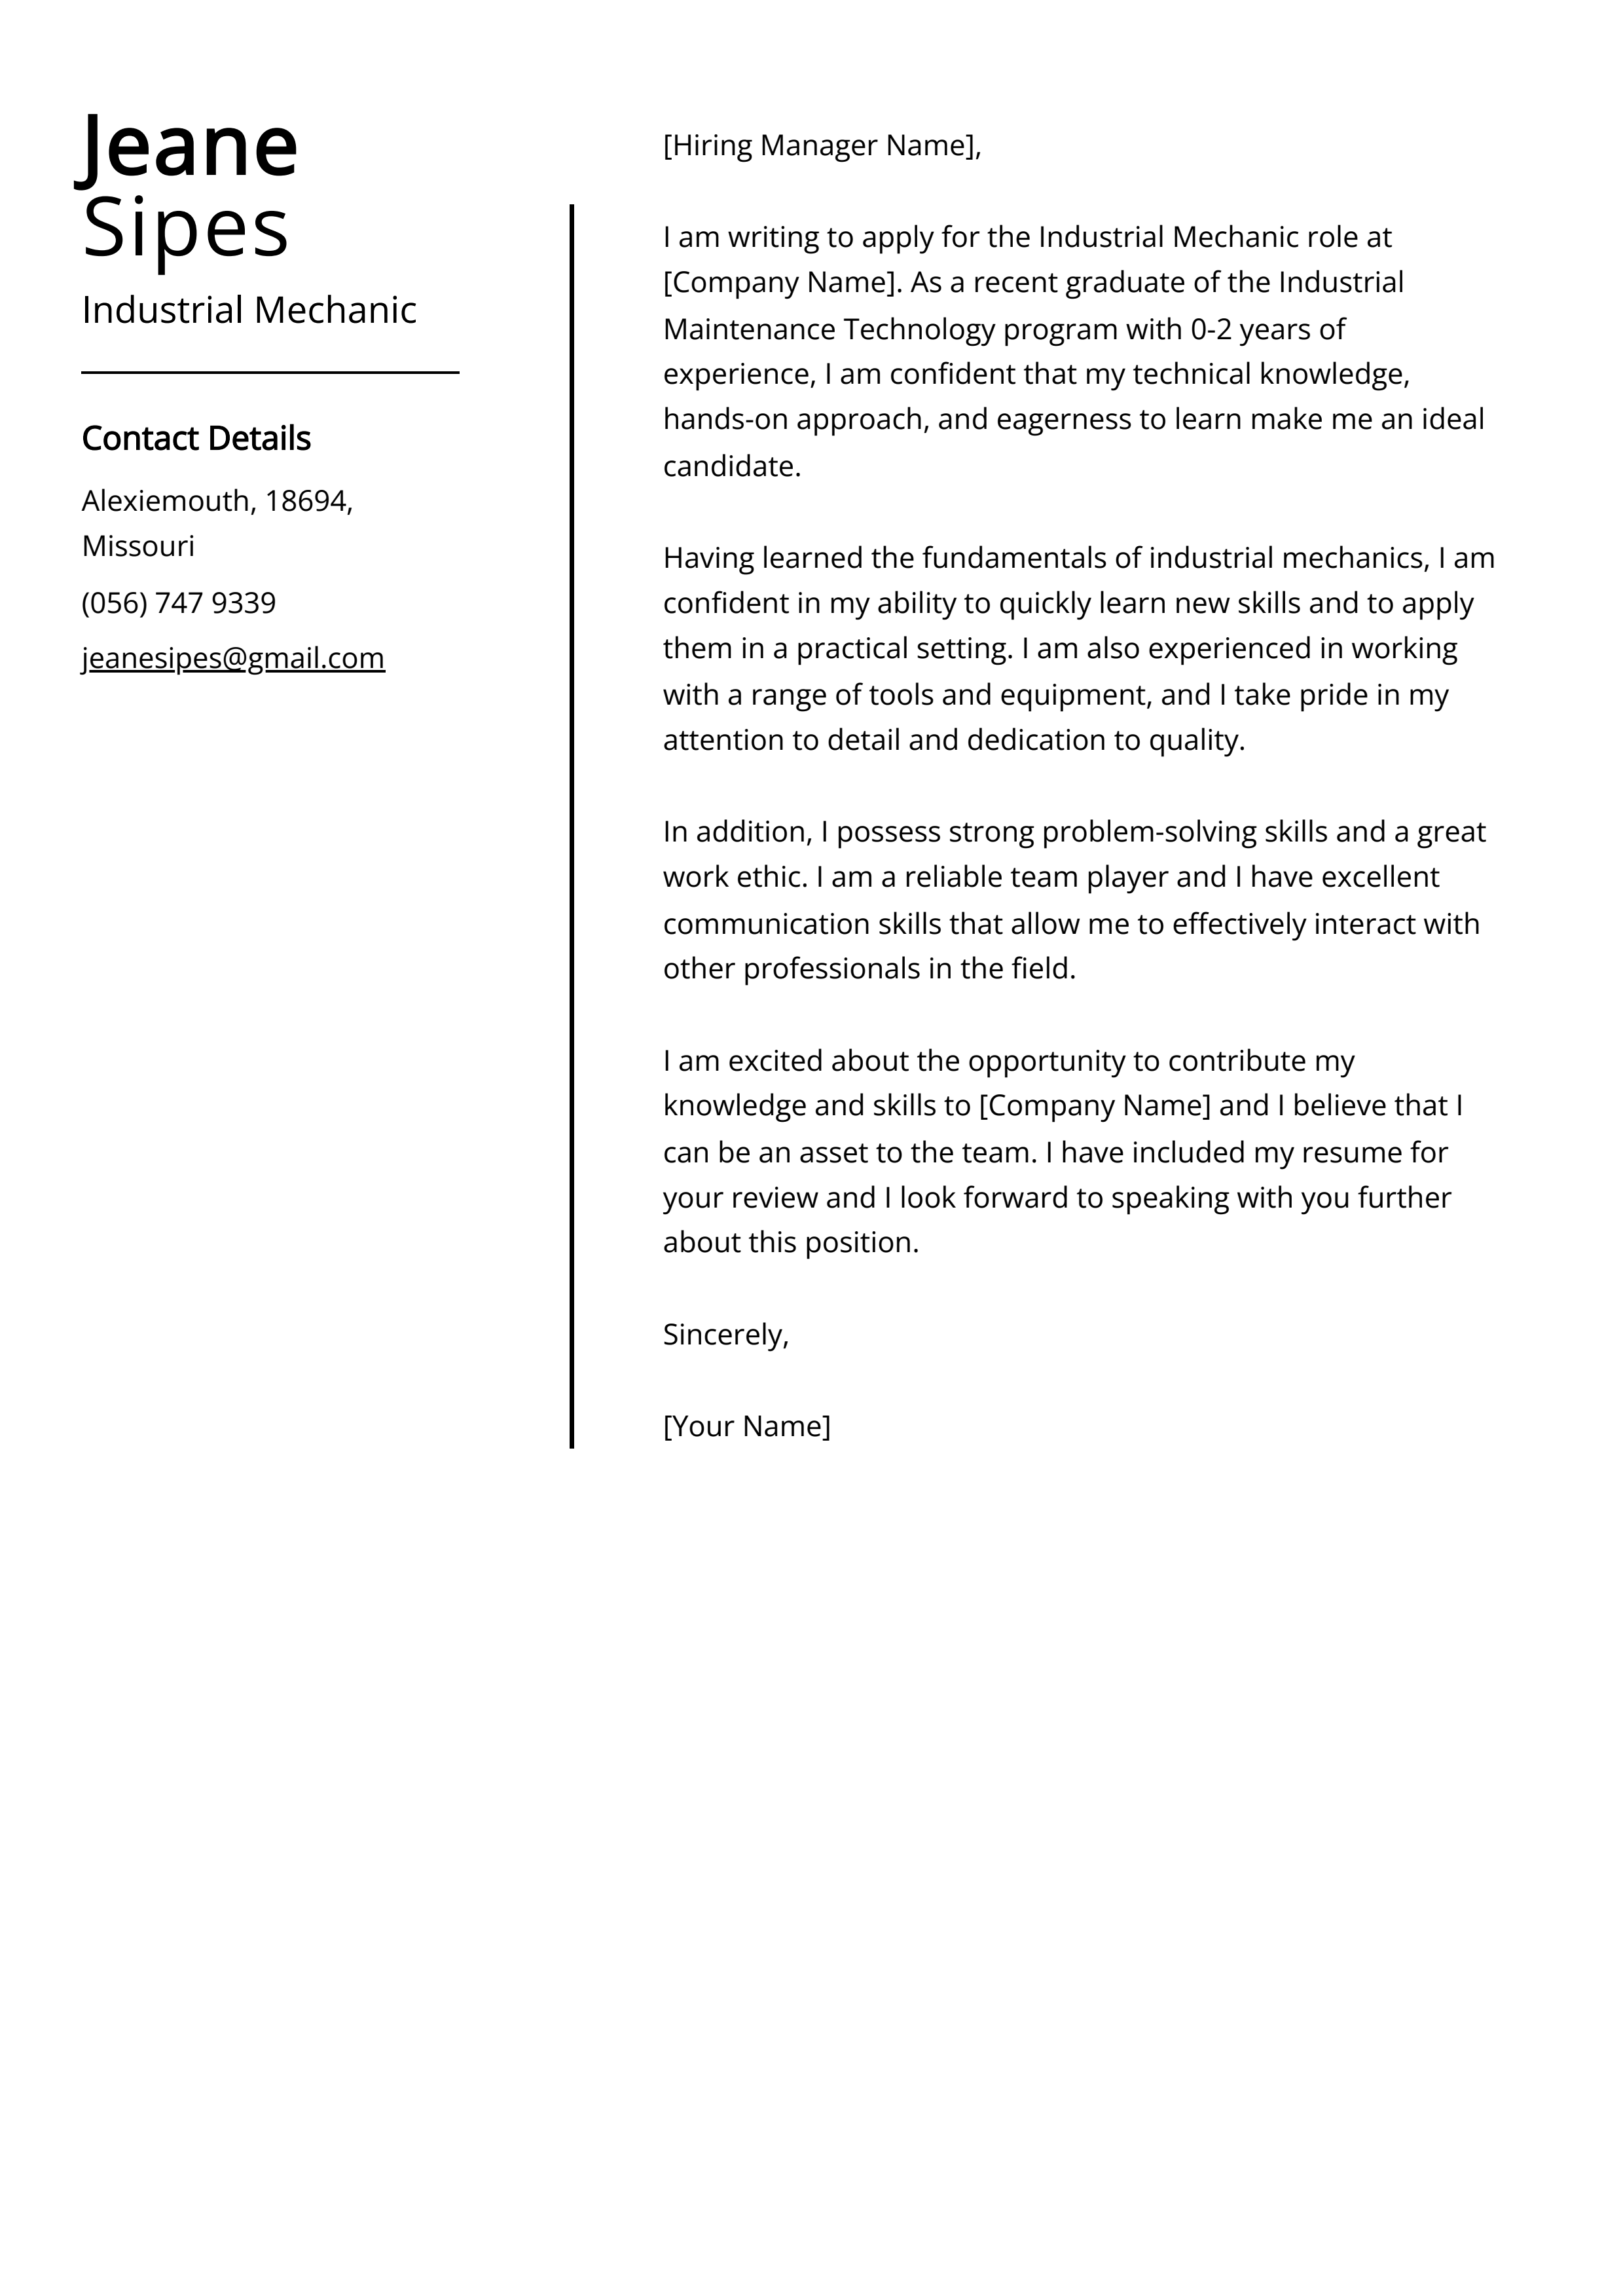 Industrial Mechanic Cover Letter Example